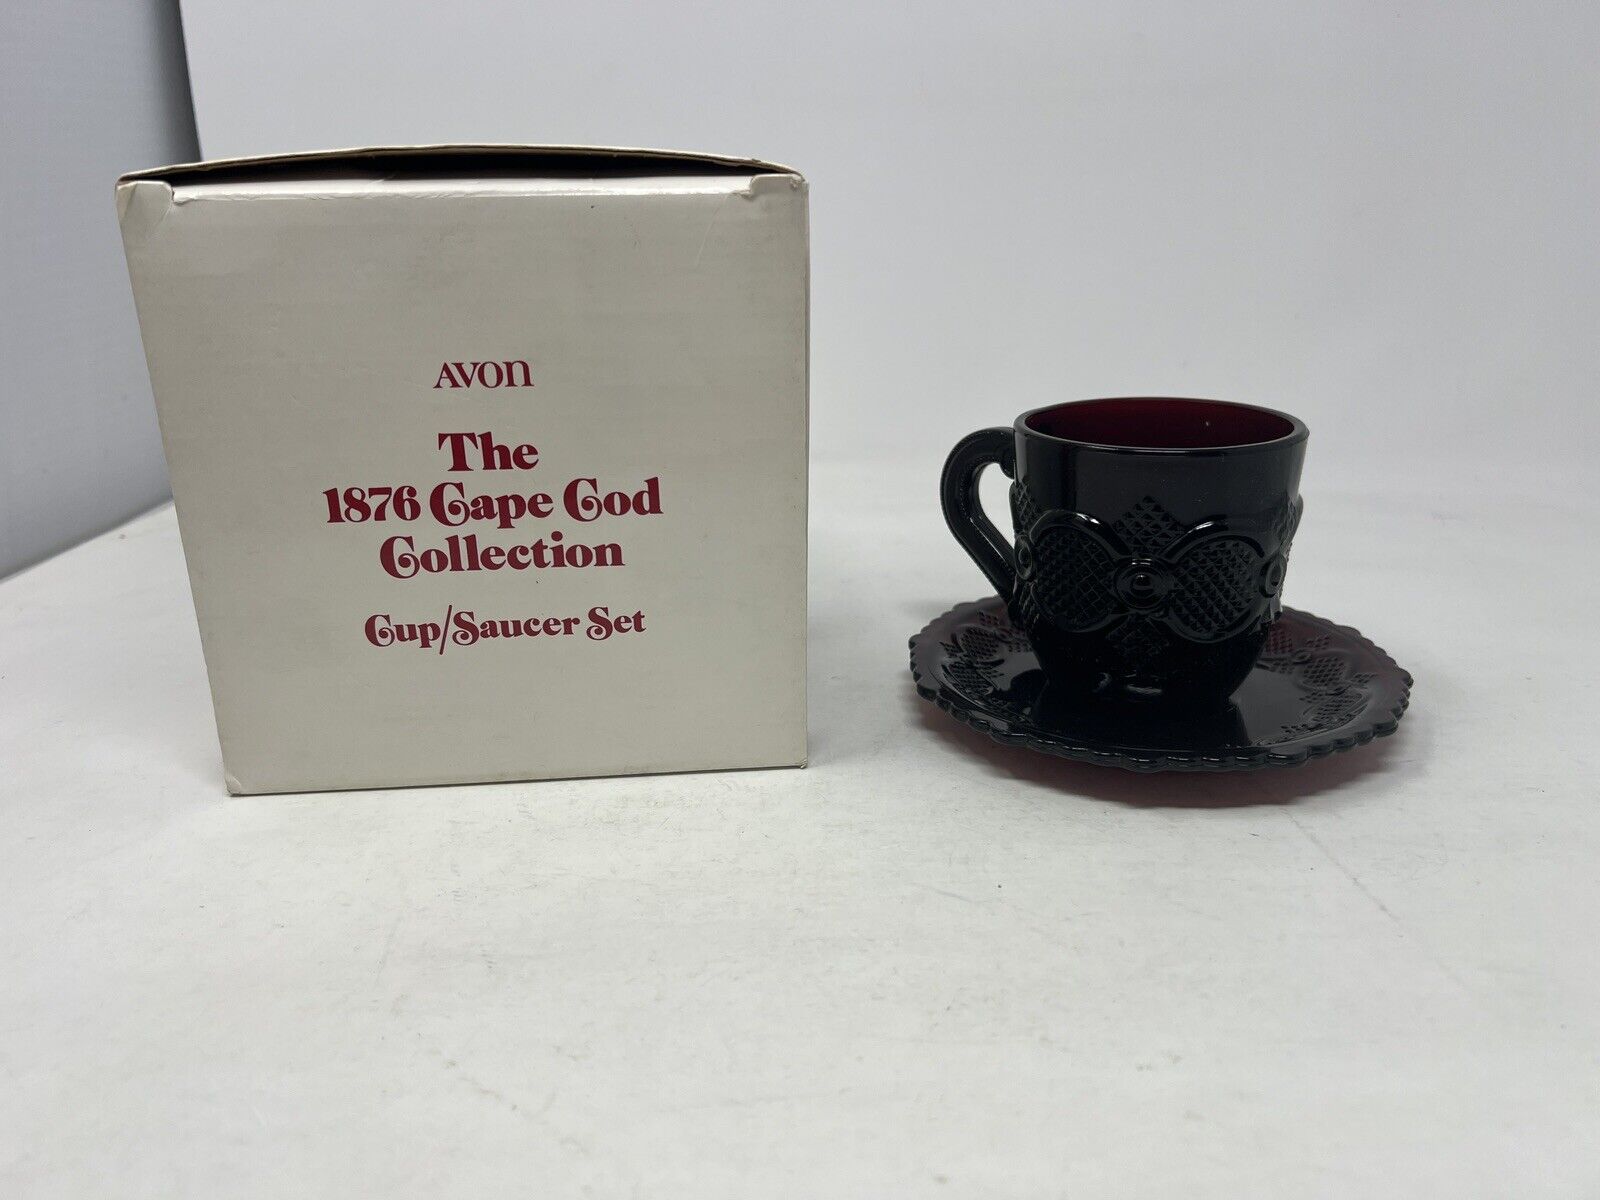 Avon The 1876 Cape Cod Collection Cup/Saucer Set with Box